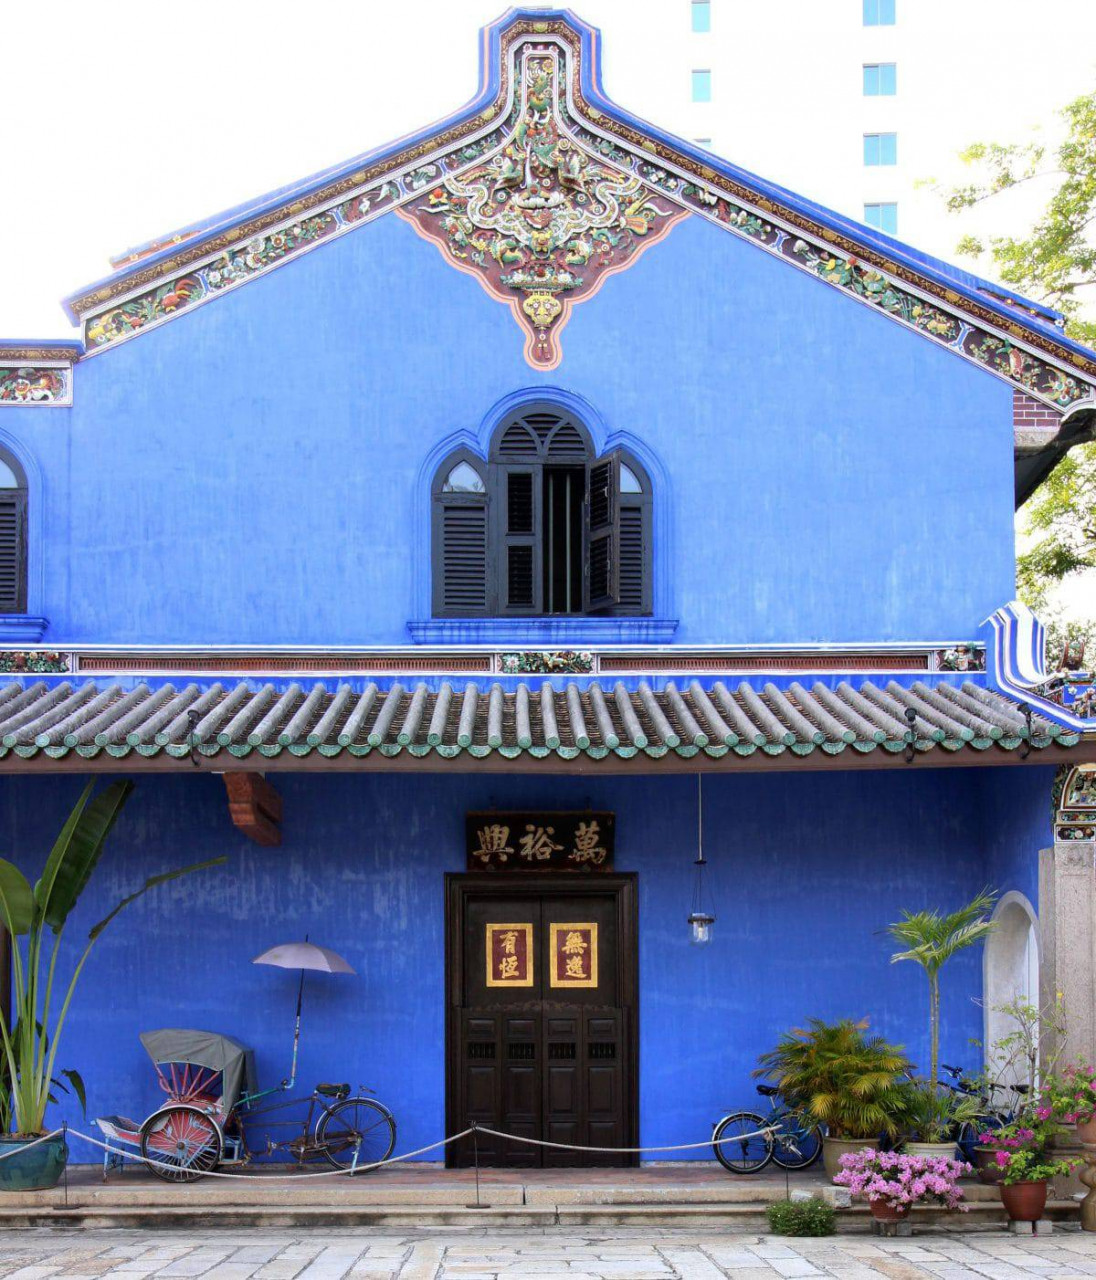 The bright blue exterior of the Cheong Fatt Tze mansion is eye-catching. – Pic courtesy of the Cheong Fatt Tze official website